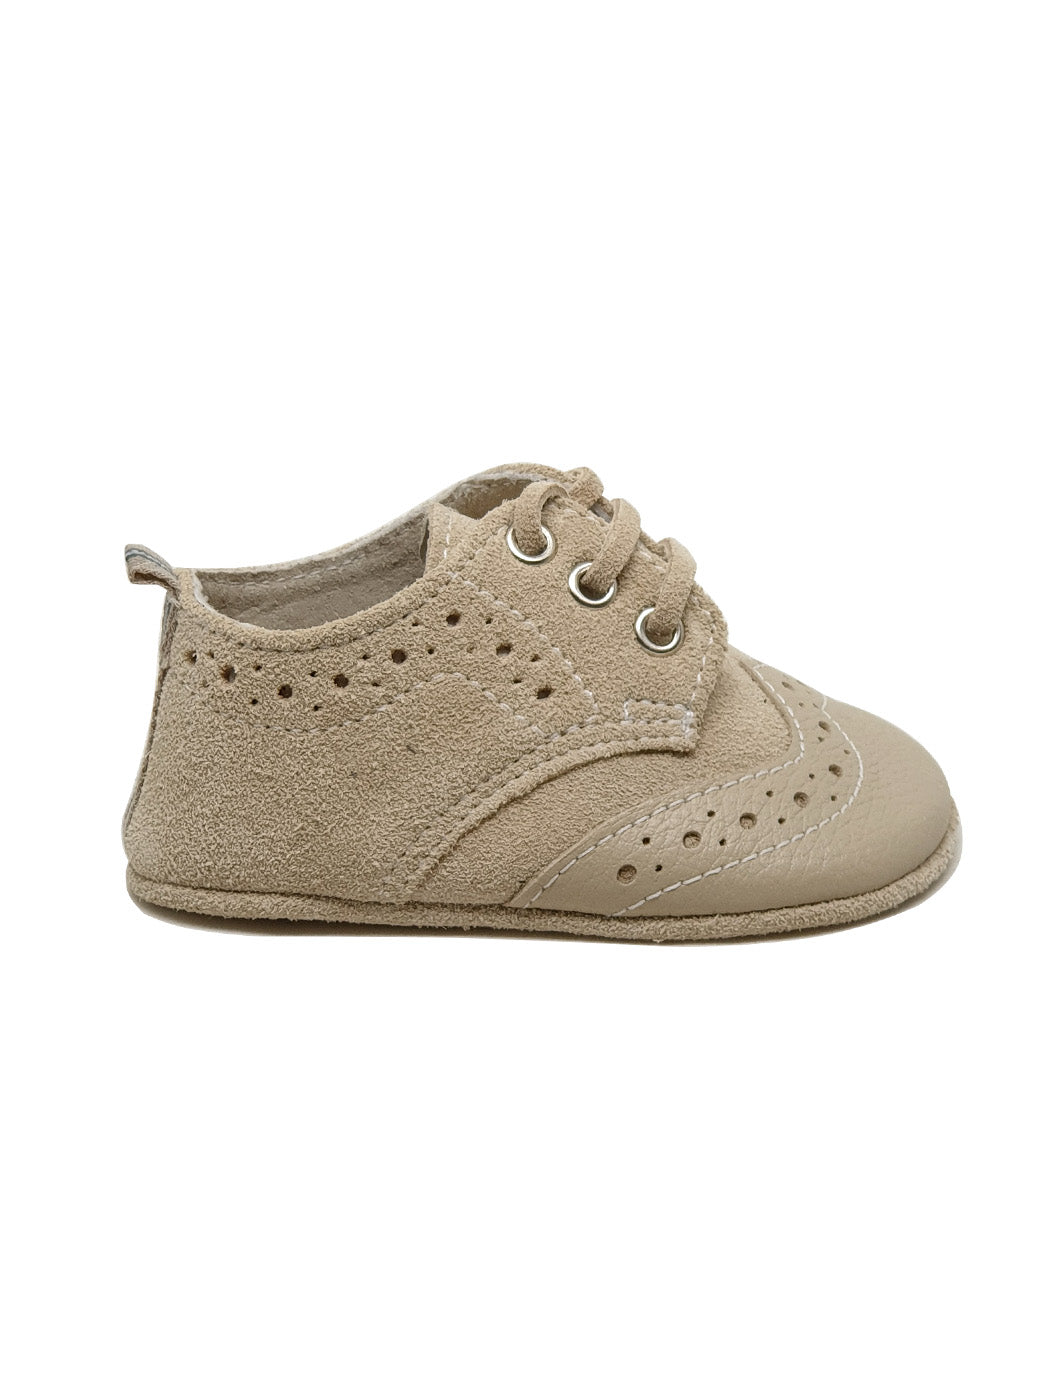 Baby's Leather Shoe for boy - Beige